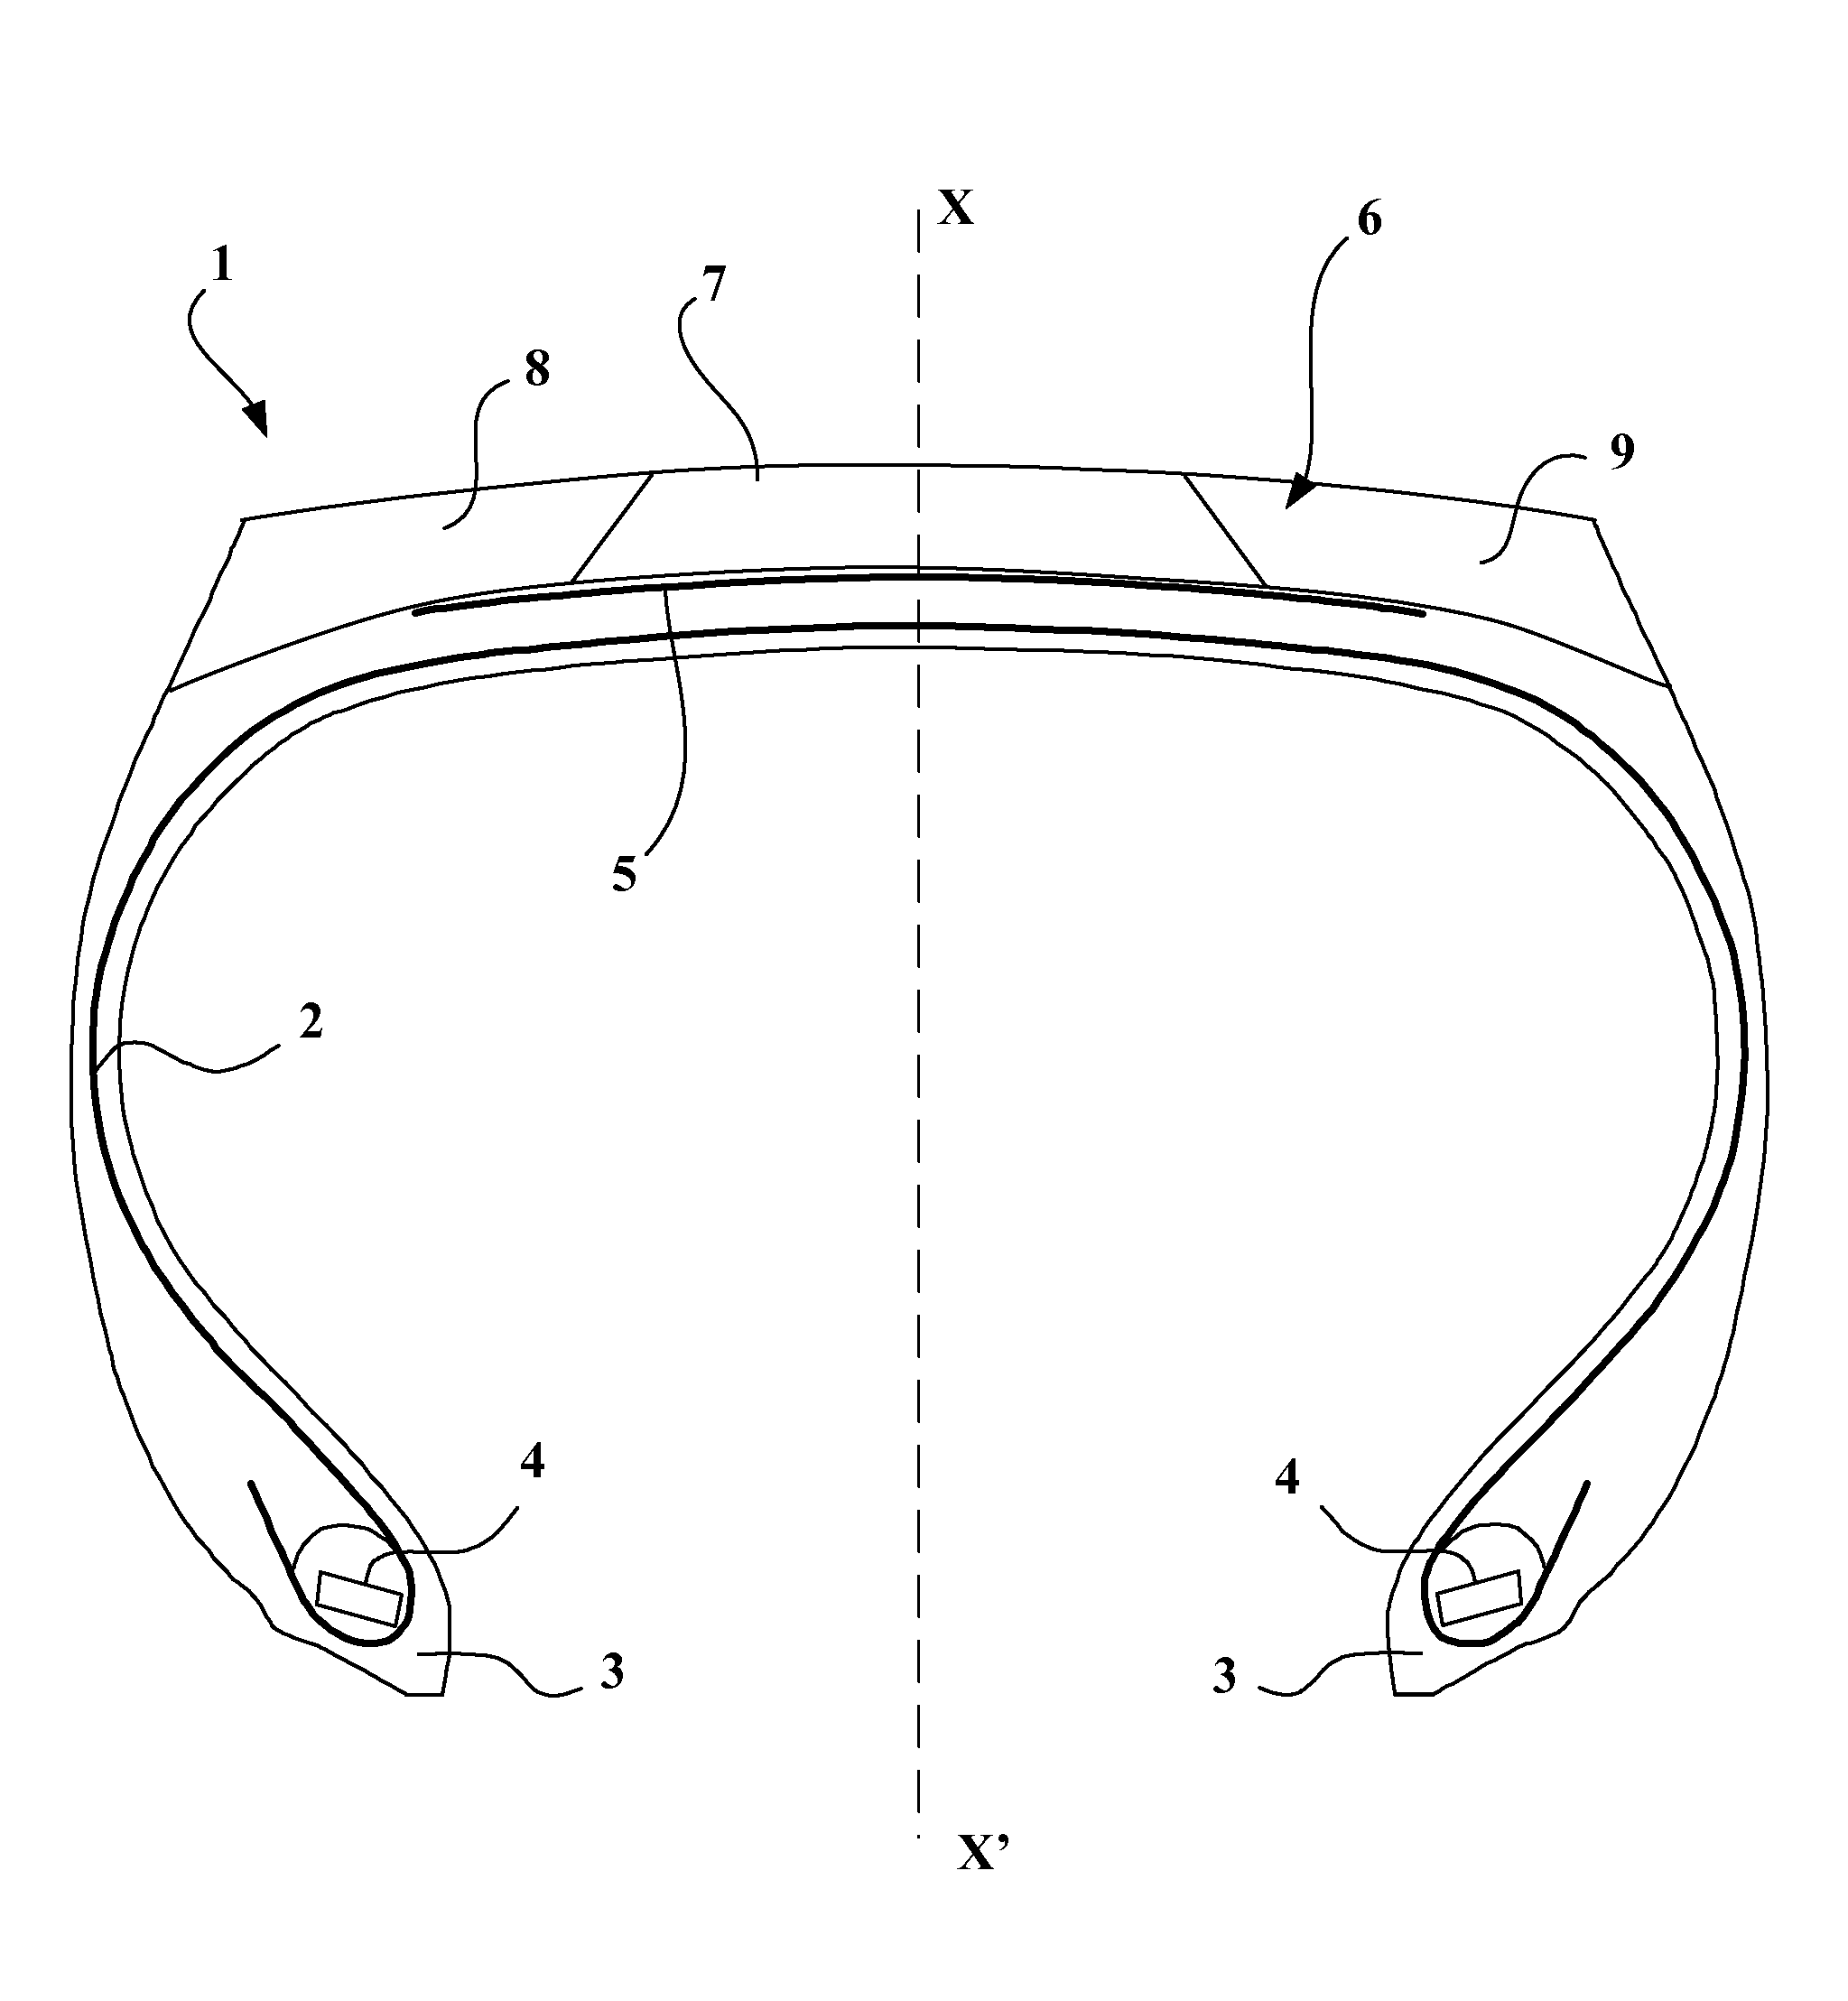 Tire comprising a tread formed by multiple elastomer blends